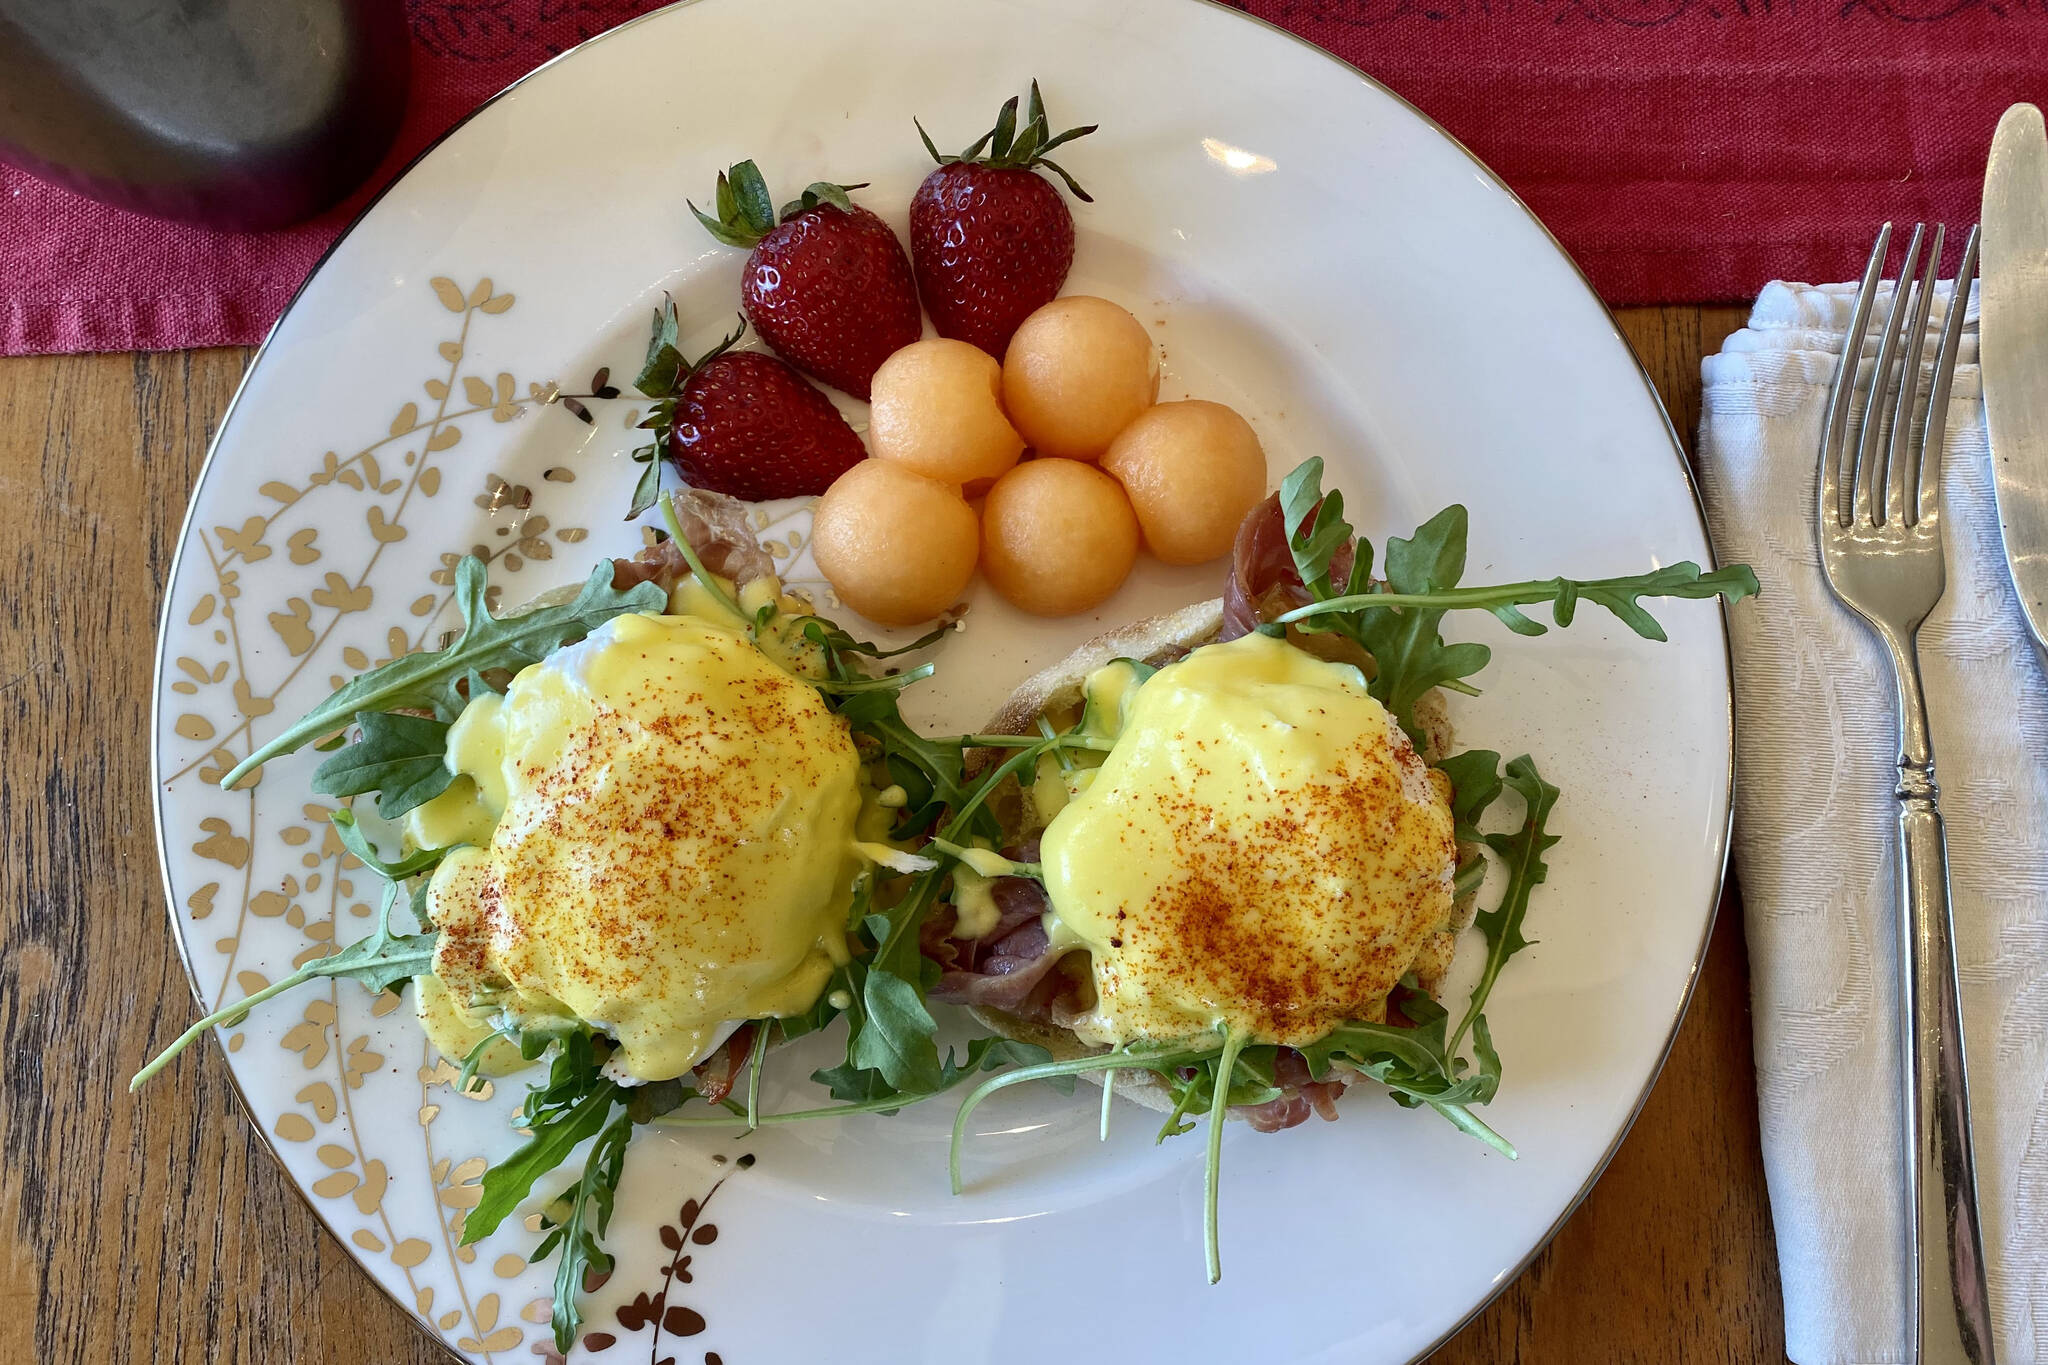 Eggs Benedict are served with hollandaise on a bed of arugula and prosciutto. (Photo by Tressa Dale/Peninsula Clarion)